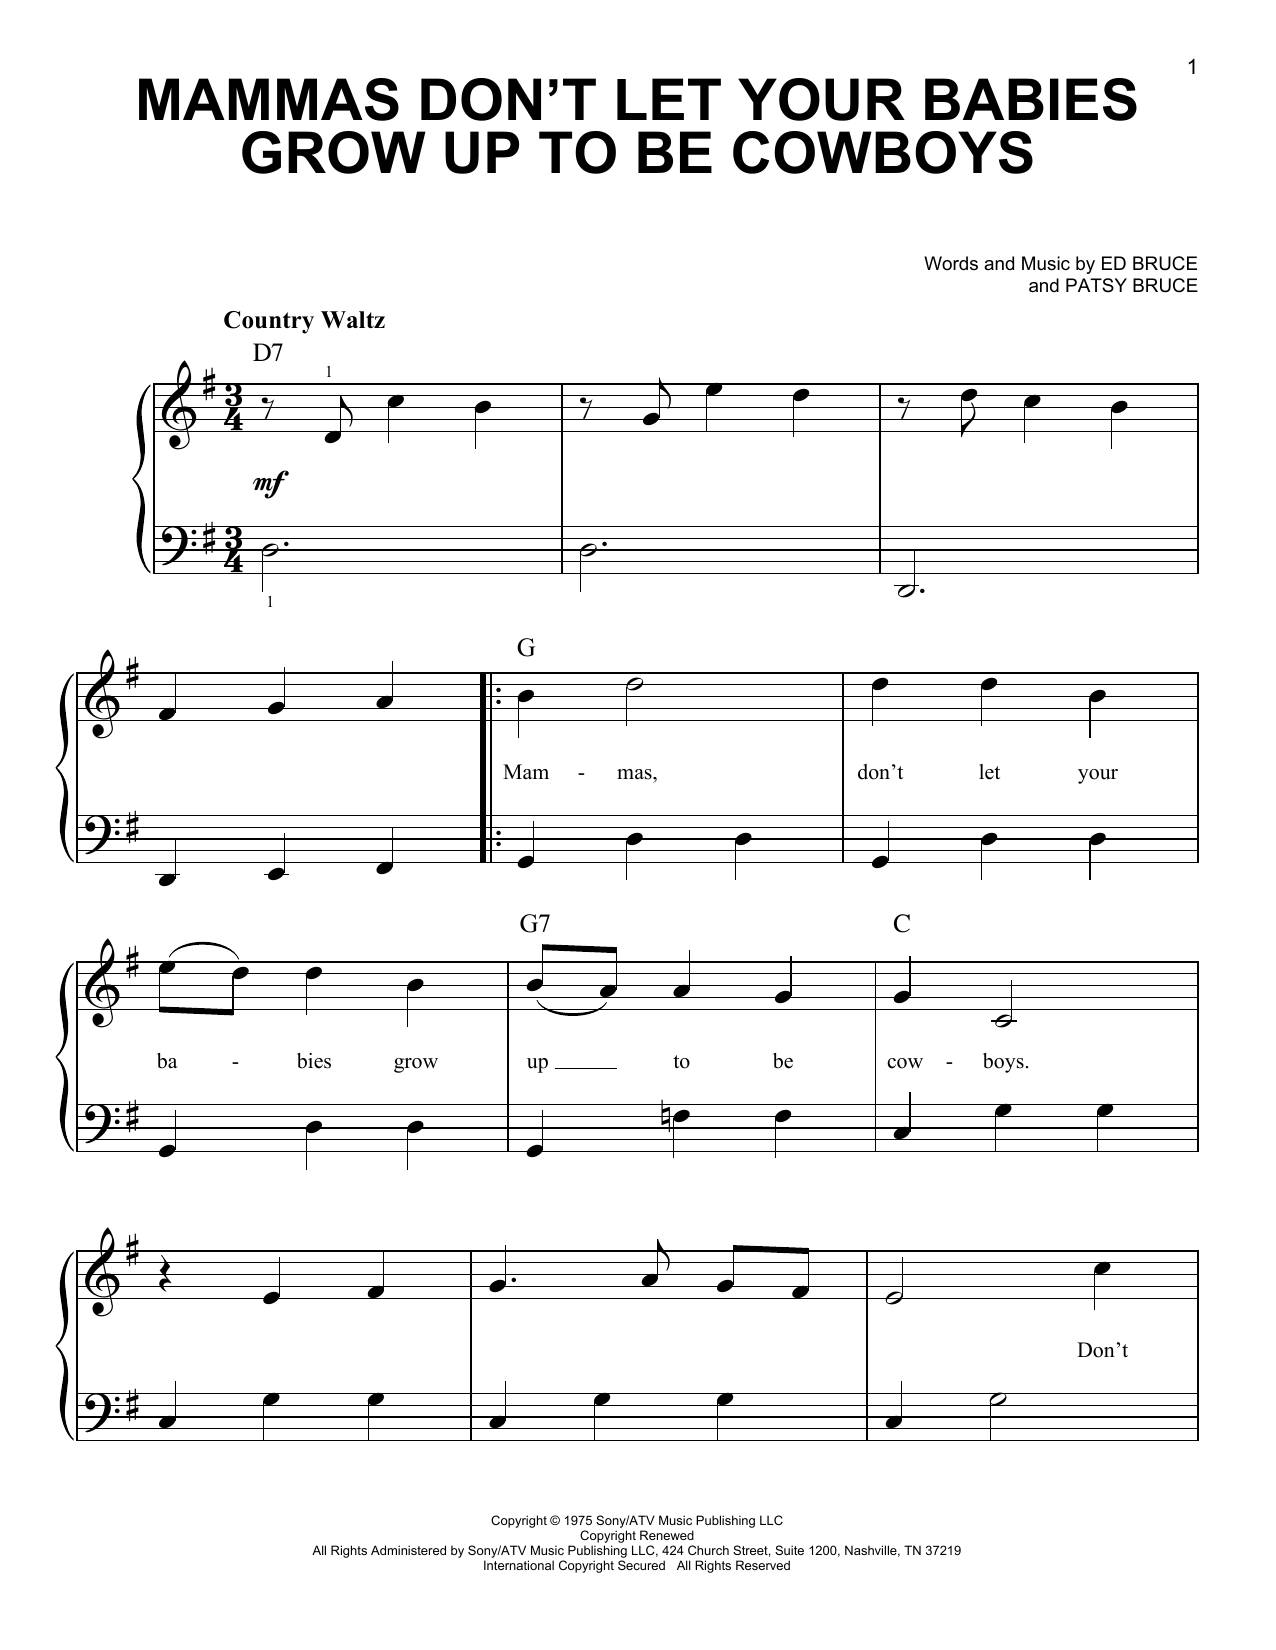 Download Waylon Jennings & Willie Nelson Mammas Don't Let Your Babies Grow Up To Sheet Music